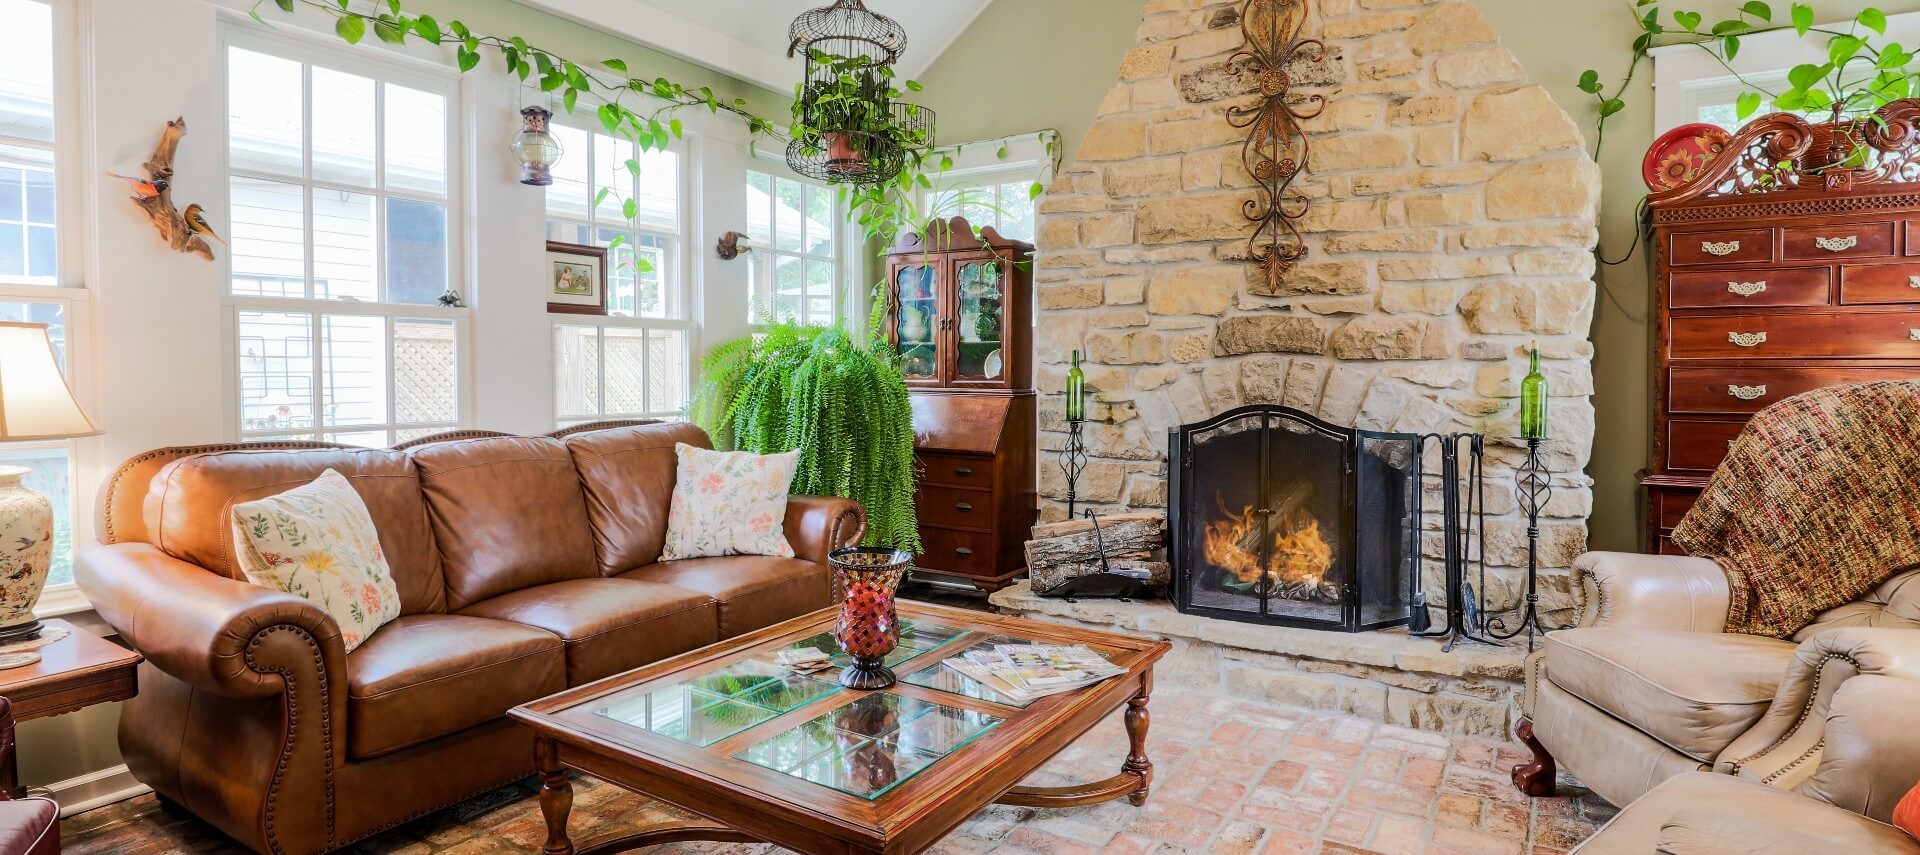 Cozy living room with large stone fireplace, large windows and leather furniture